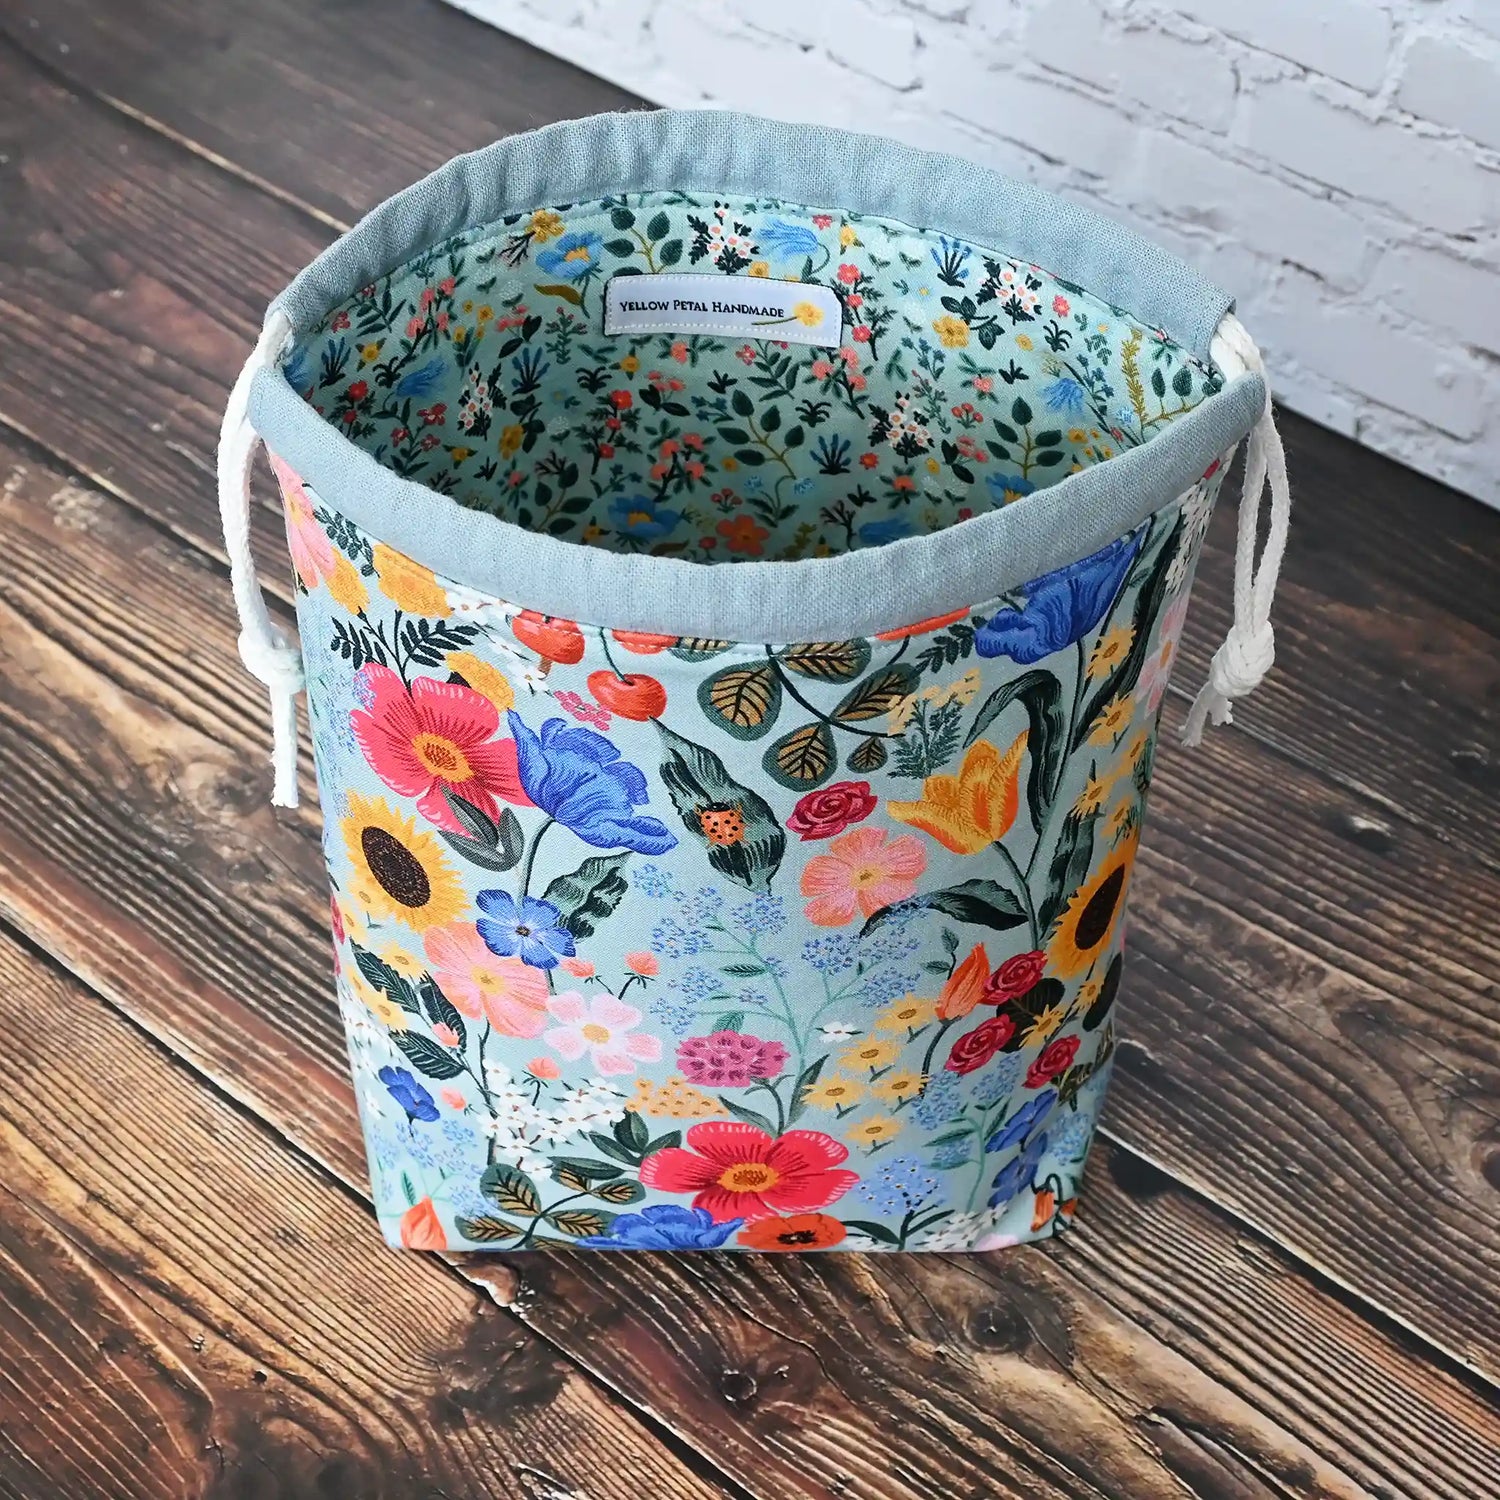 Pretty muted blue grey floral drawstring project bag.  This bag comes with or without pockets.  Made from RIfle Paper Co's Curio collection in Nova Scotia, Canada by Yellow Petal Handmade.